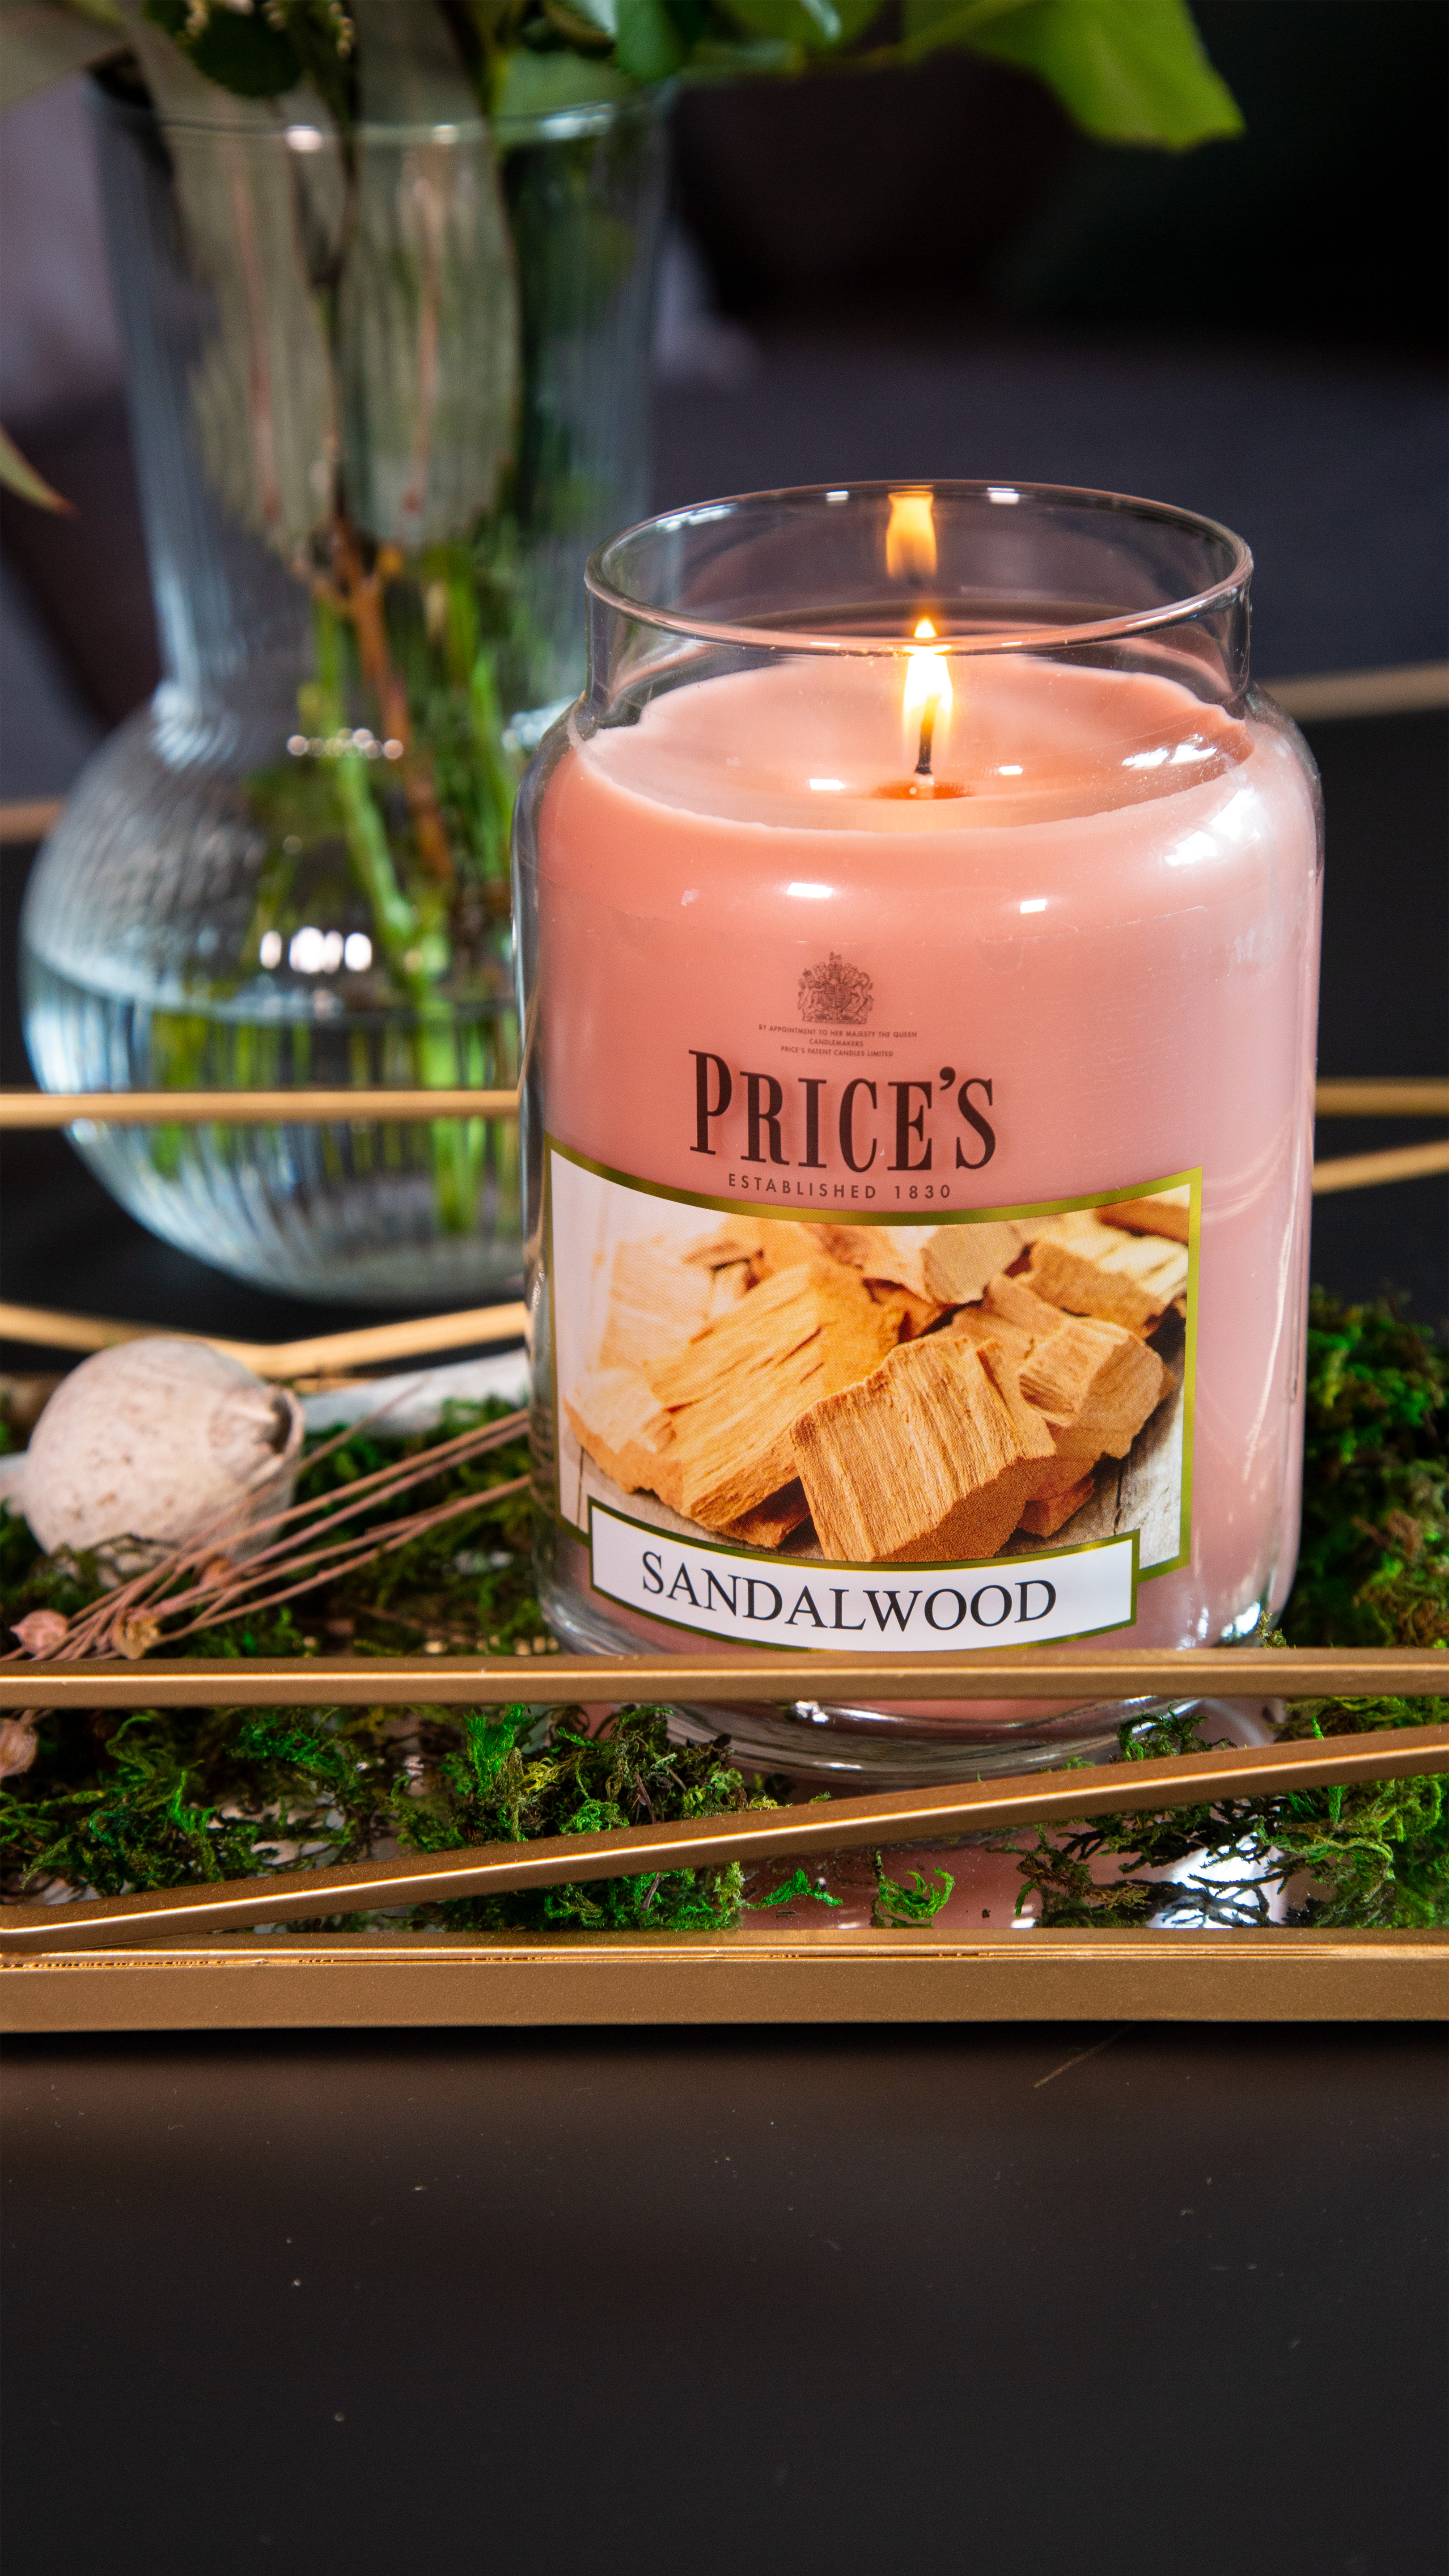 Prices Candle "Sandalwood" 630g